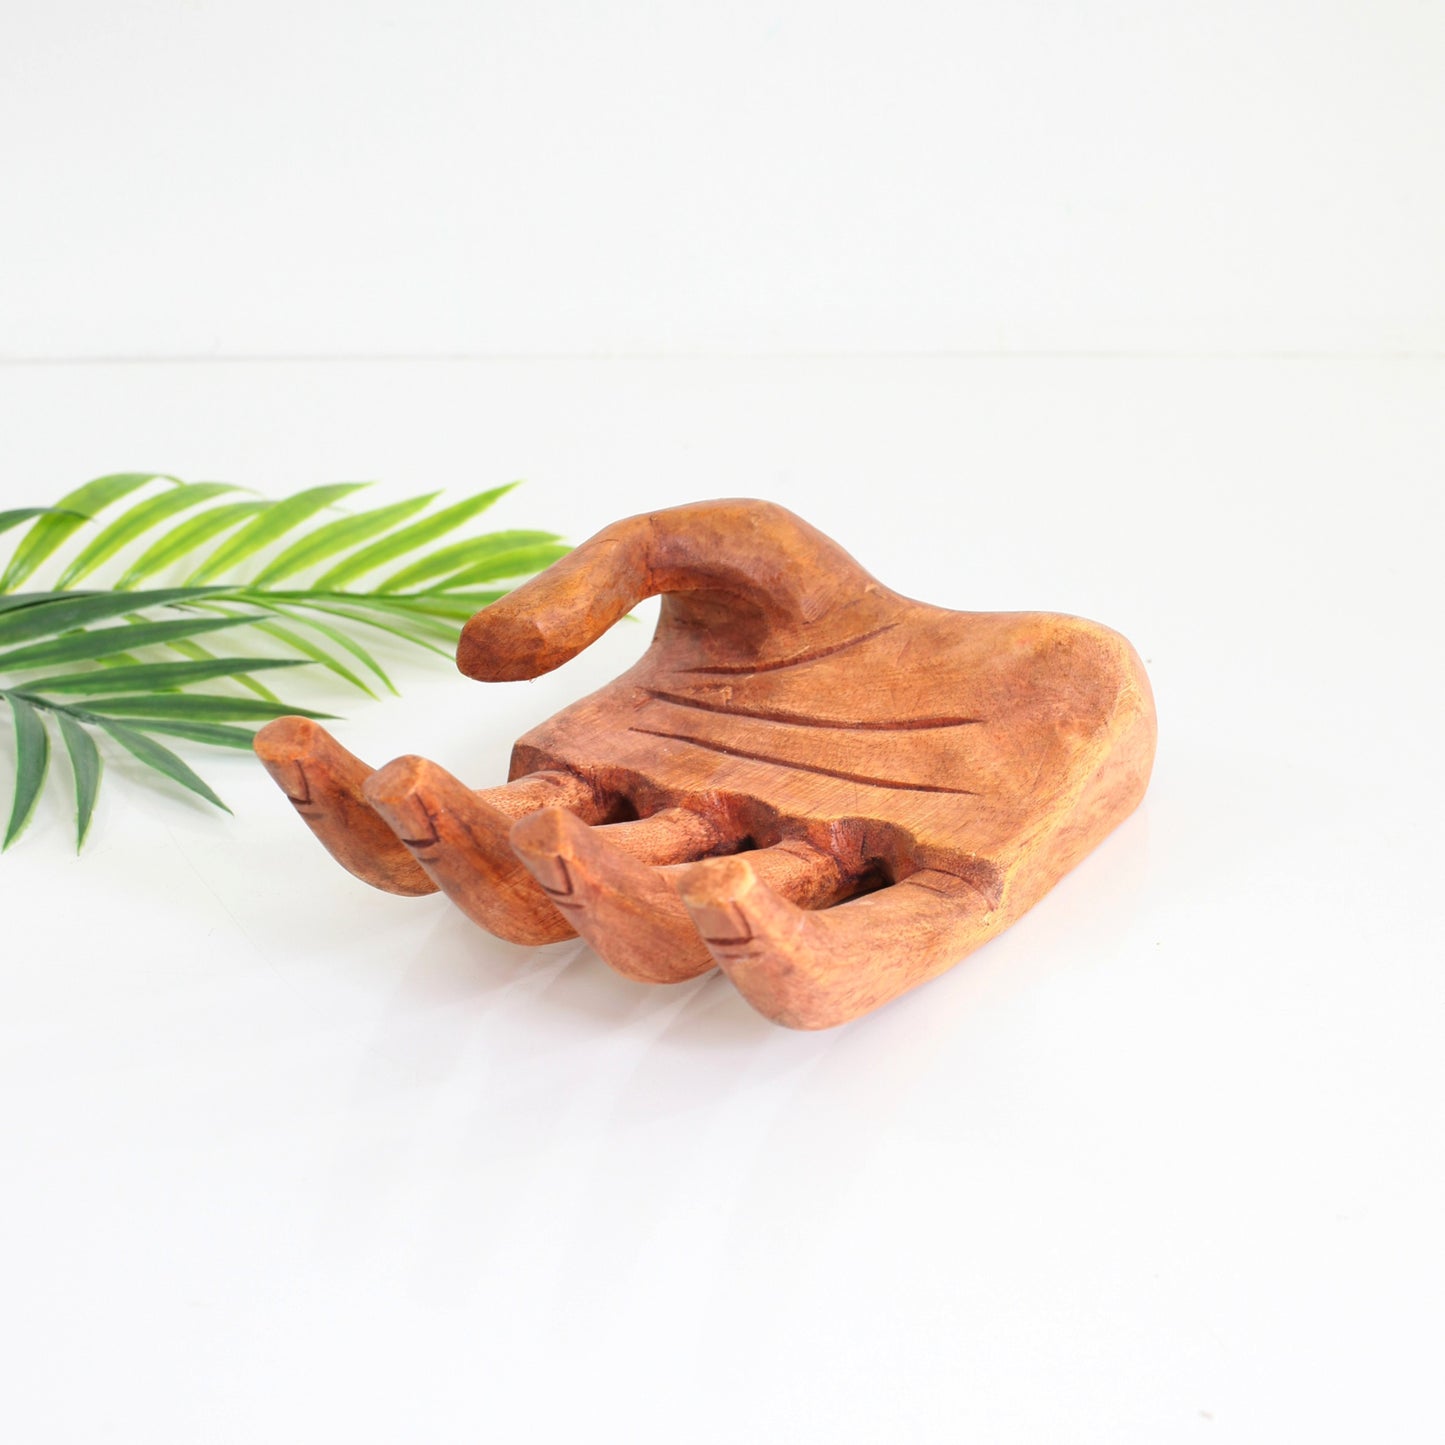 SOLD - Vintage Hand Carved Wooden Hand Catch-All